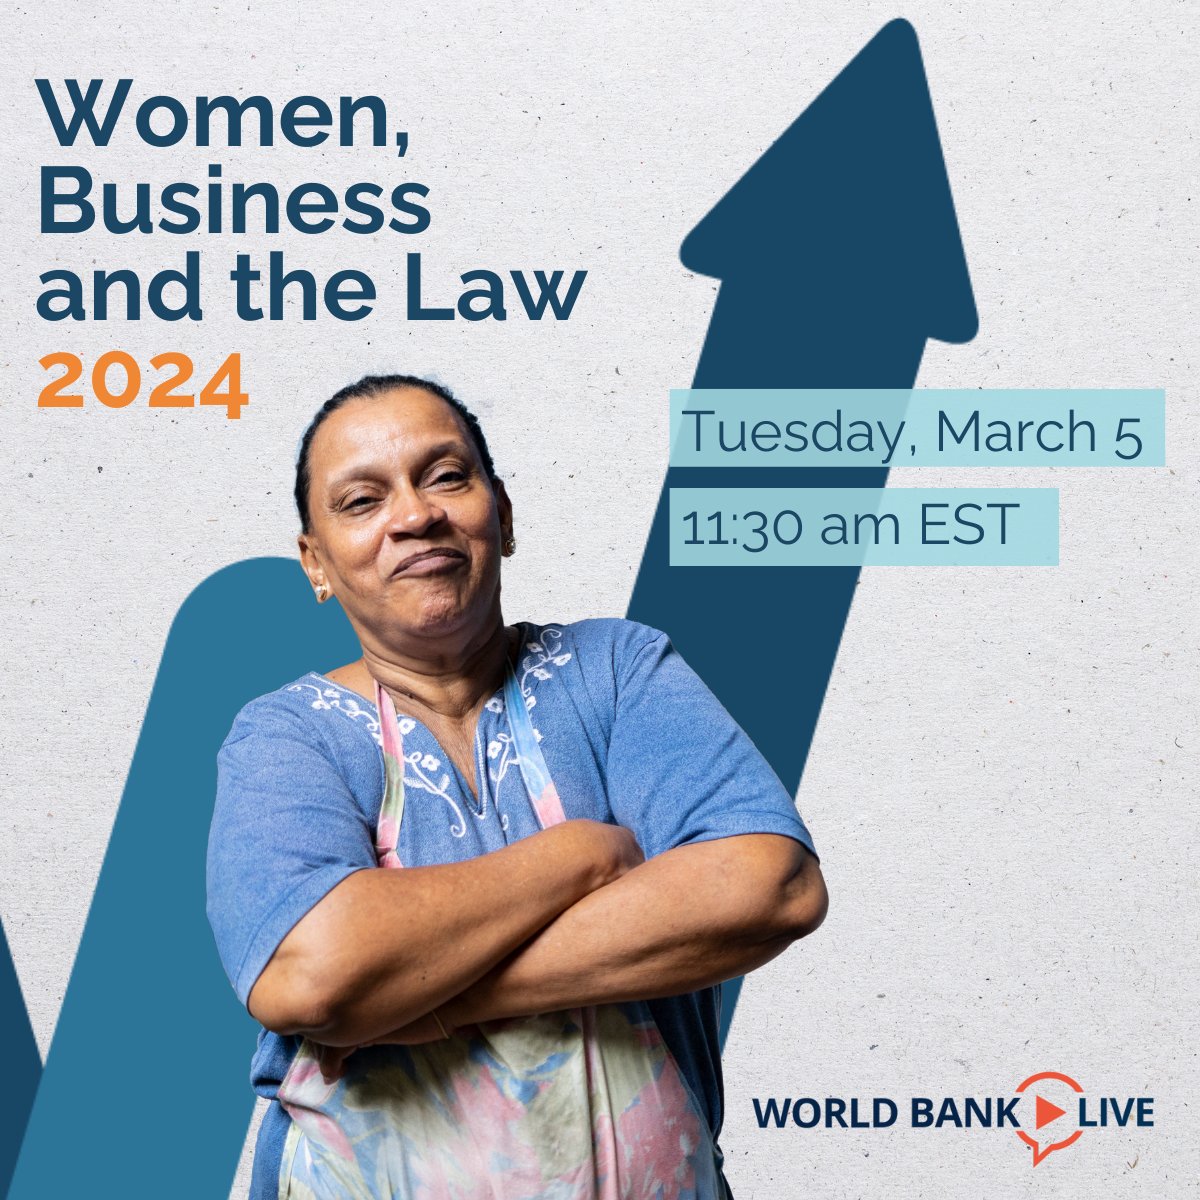 MARCH 5: Join the live launch of the #WomenBizLaw report.
 
For the first time, the report analyzes not only the pace of legal reforms to #AccelerateEquality & economic opportunity for women but also countries’ efforts to implement those laws.

📺wrld.bg/RWsK50QJSik #IWD2024